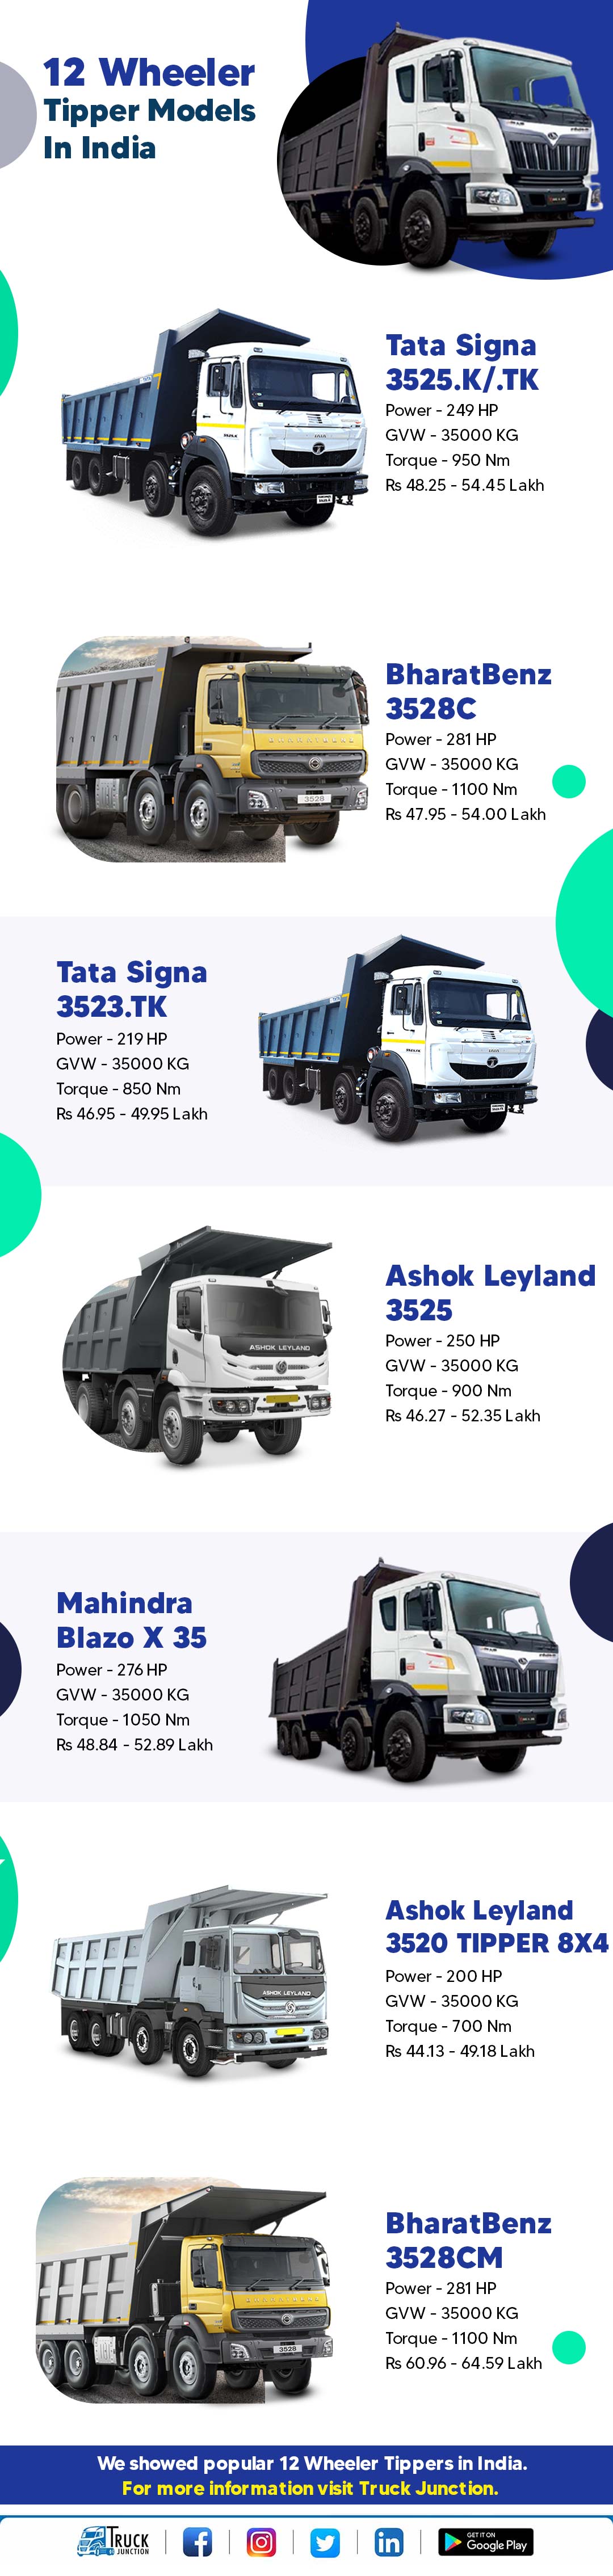 Popular 12 Wheeler Tippers infographic